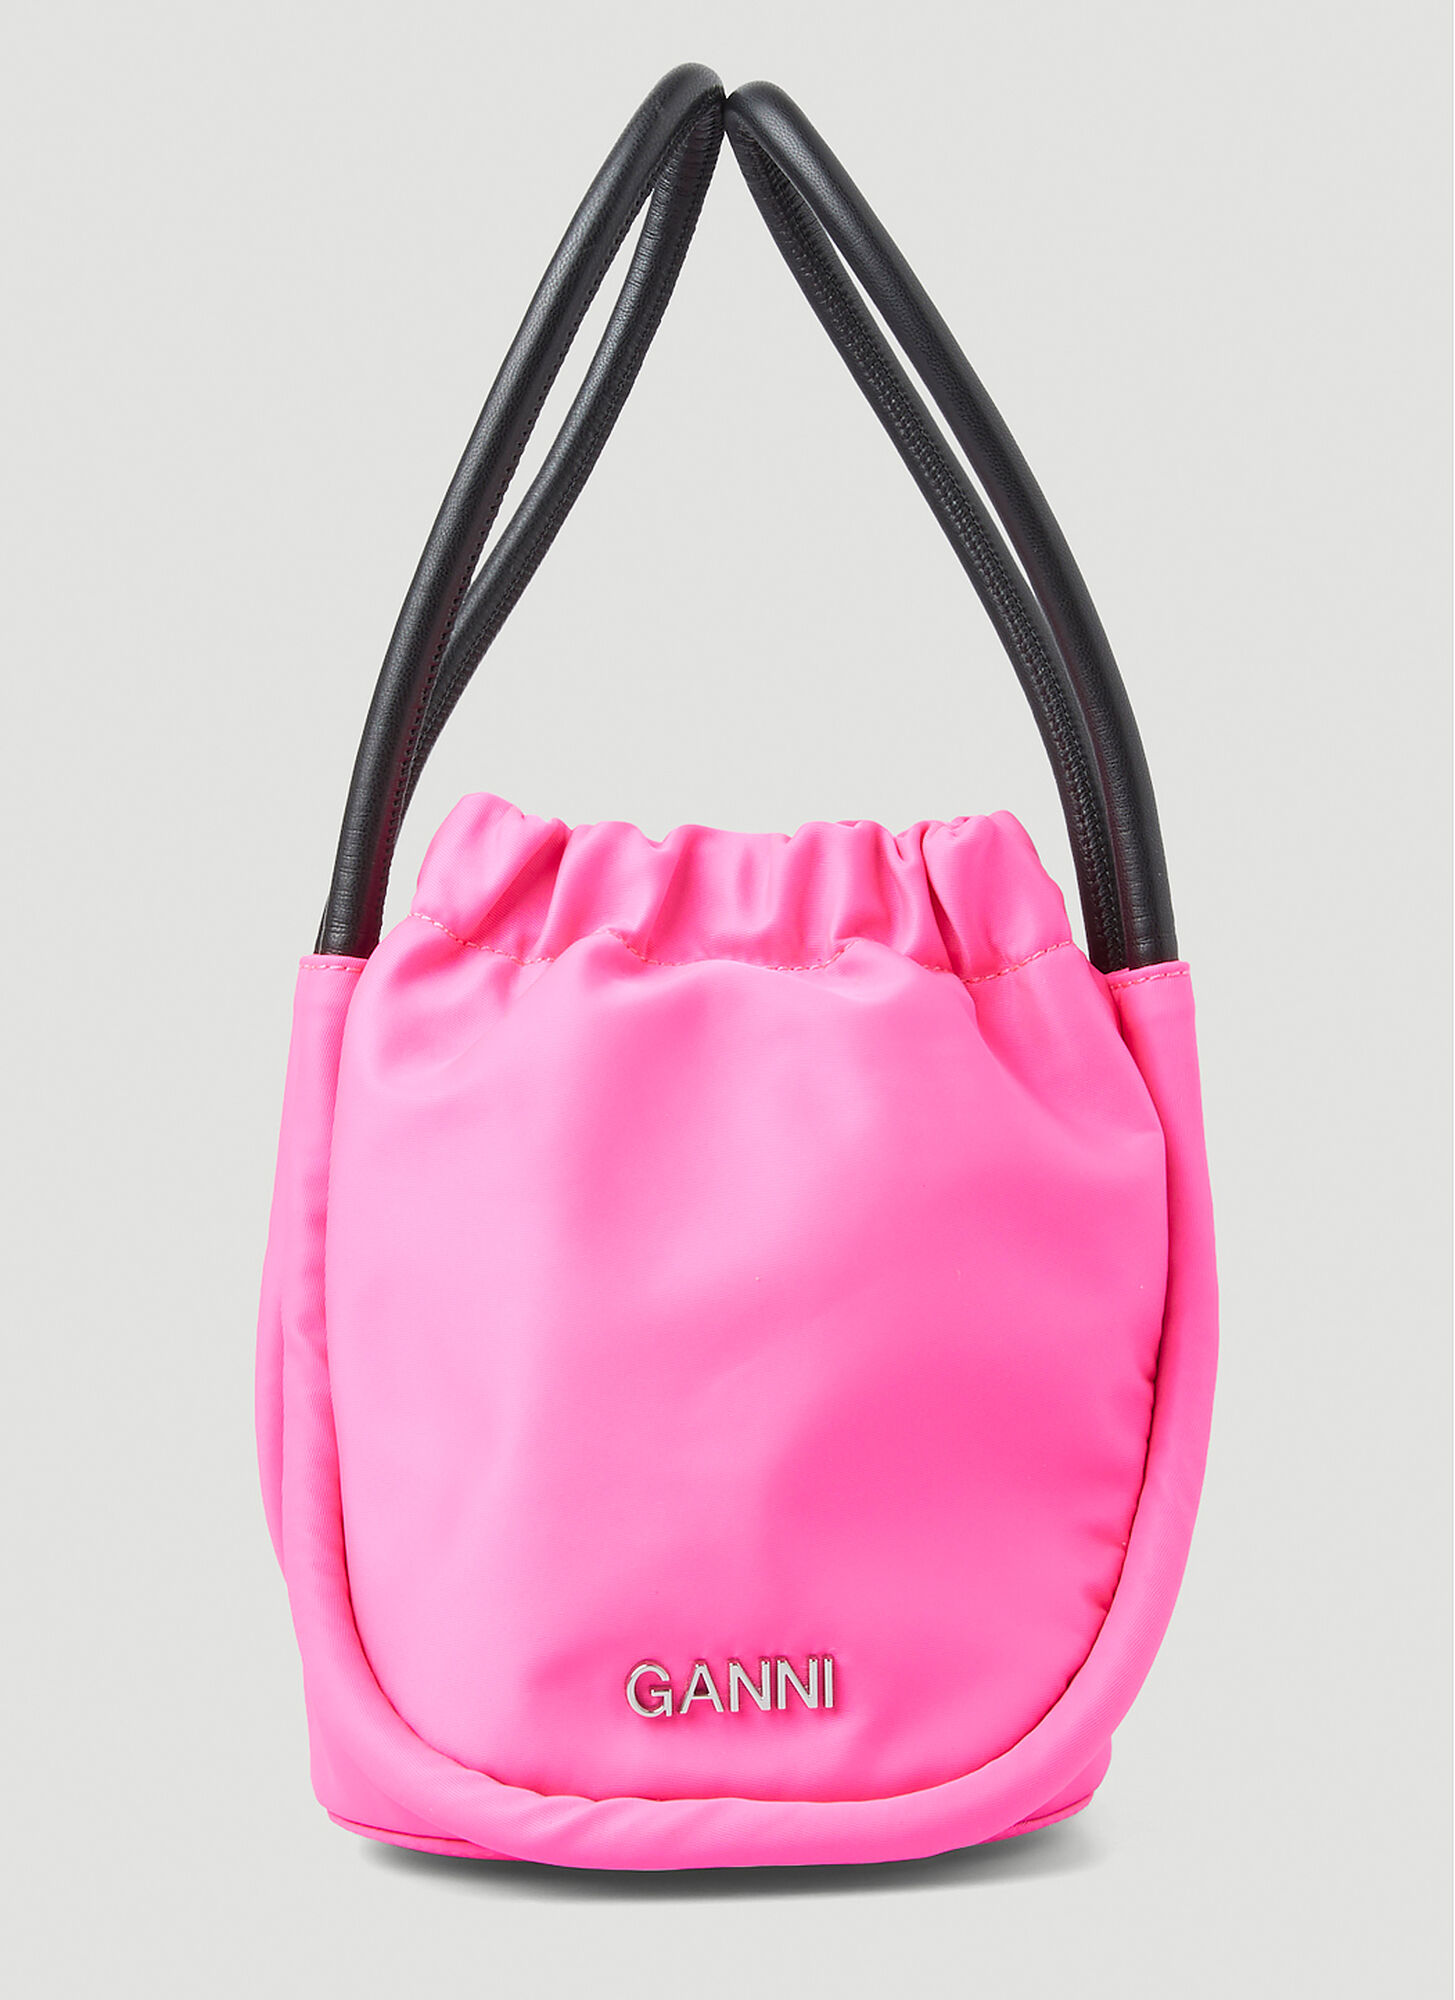 Ganni Knot M In Pink